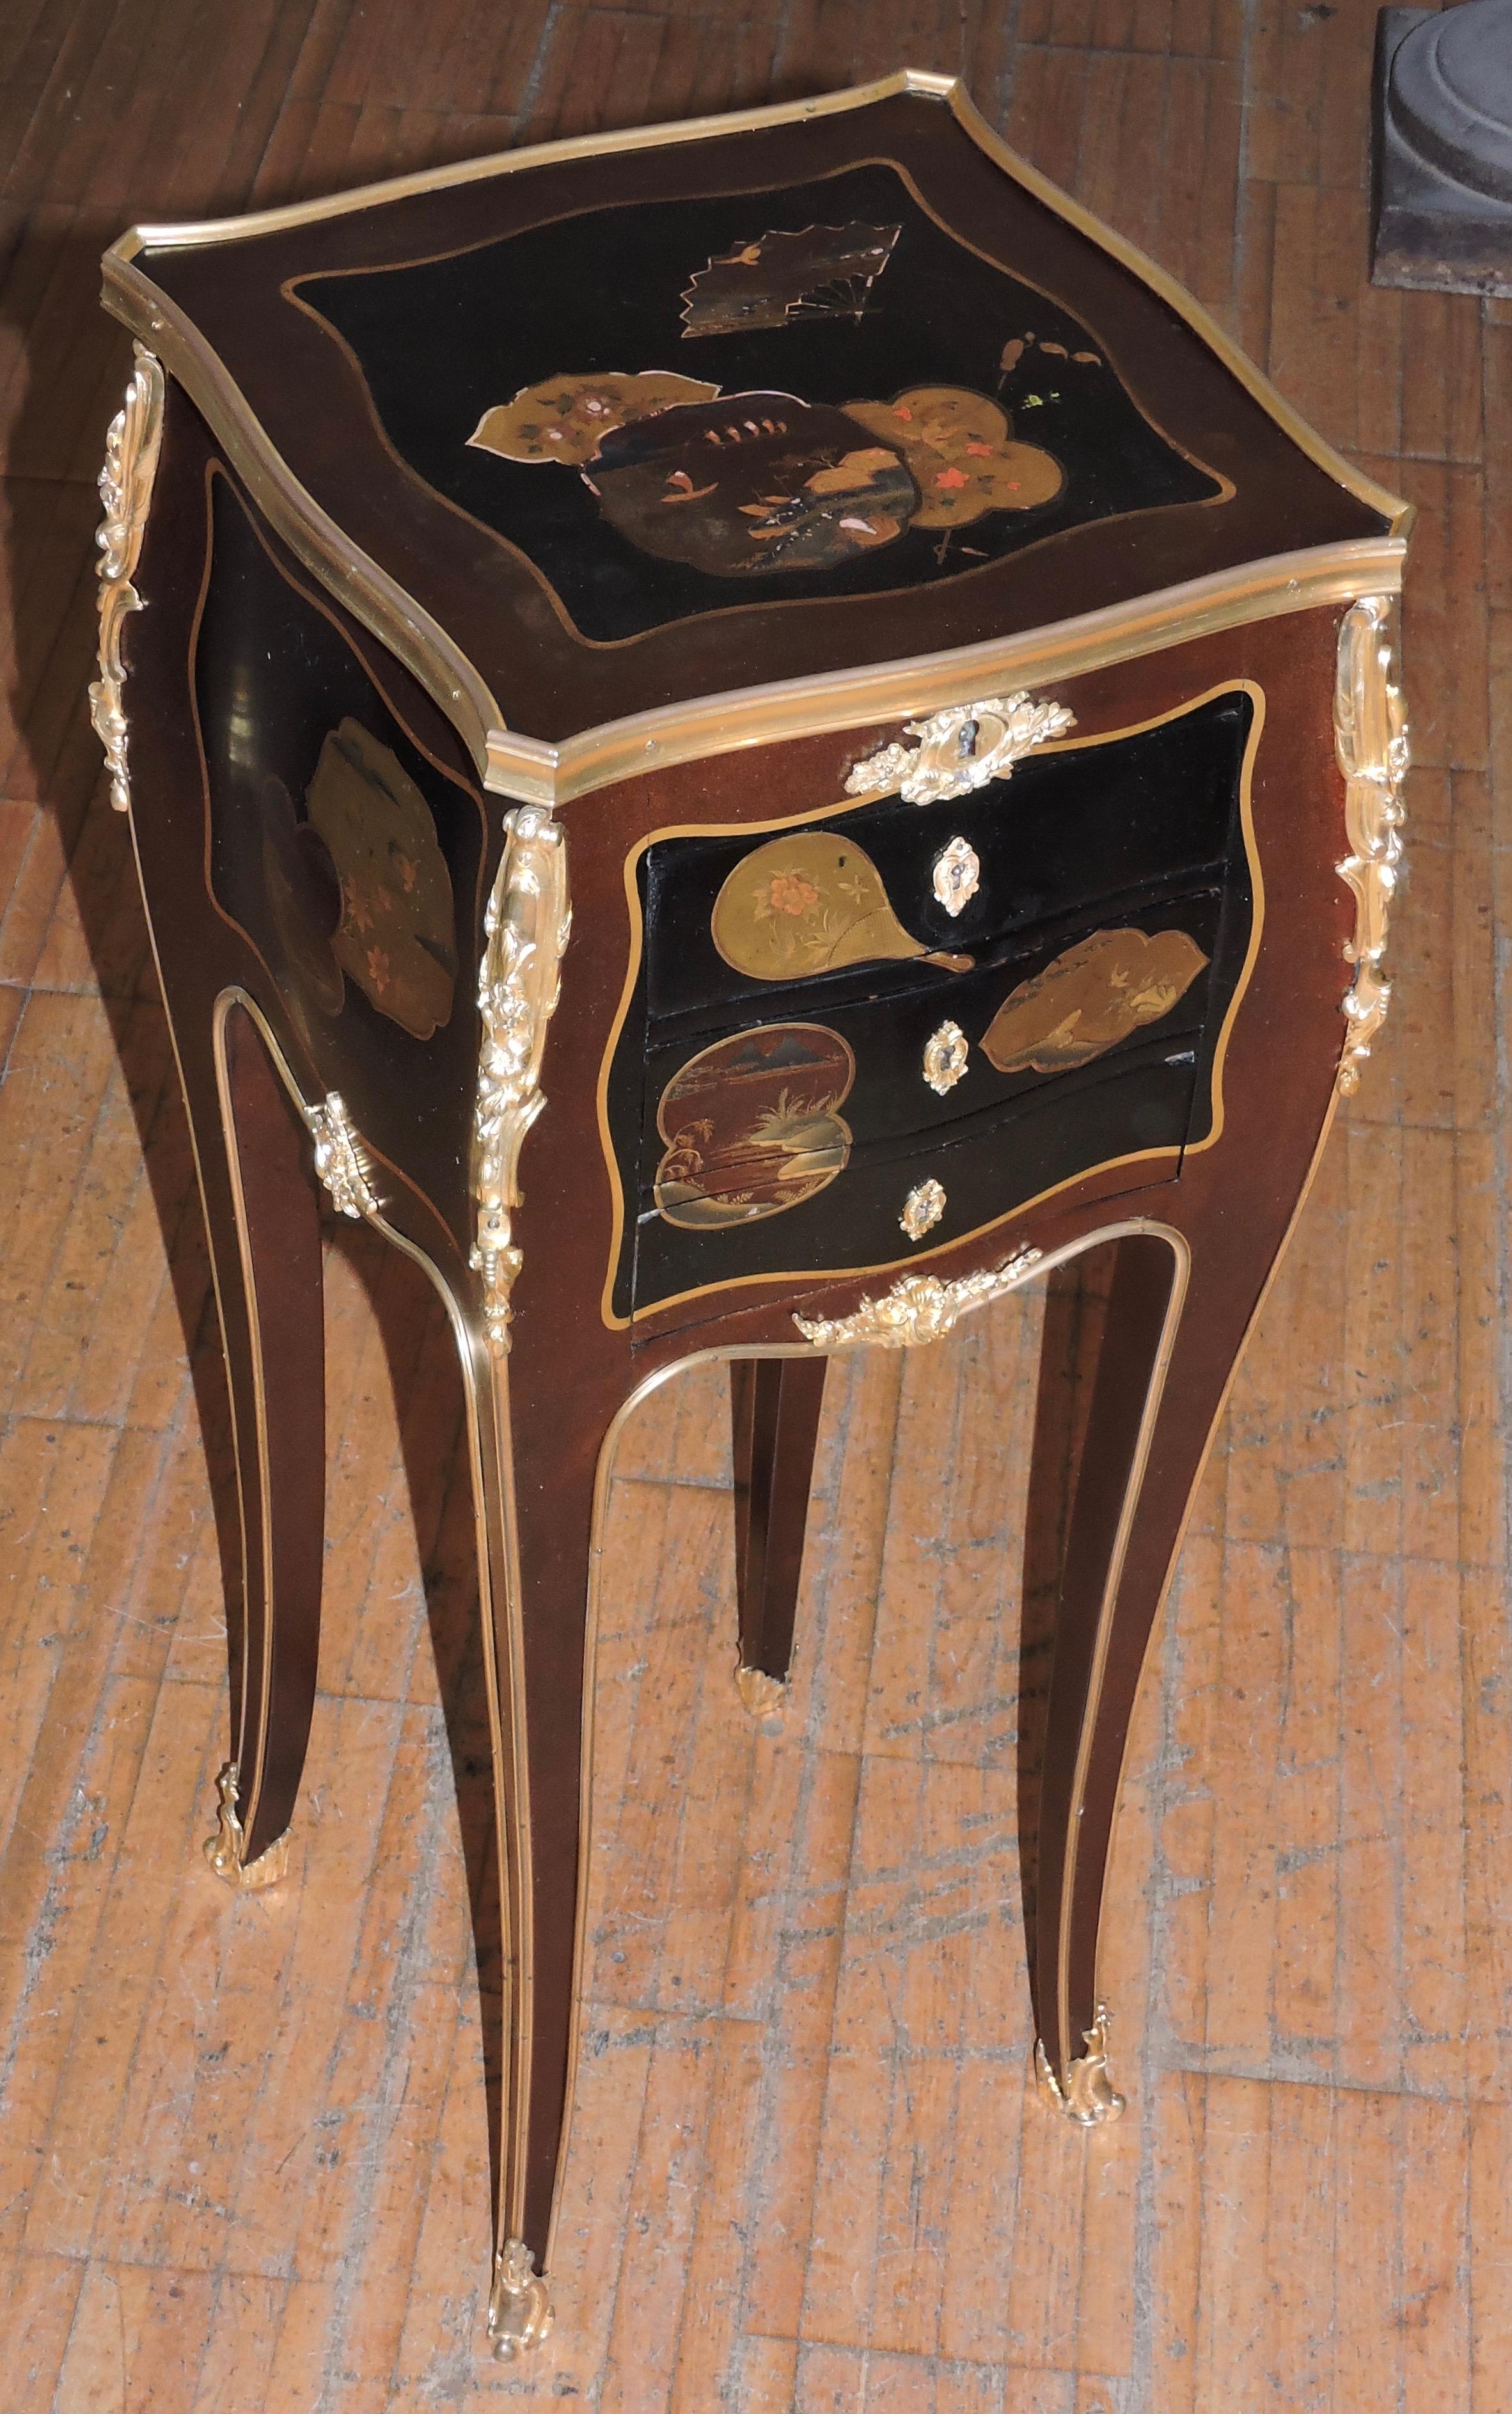 A French Louis XV style ormolu-mounted, Aventurine and Japanese lacquer Table à Écrire circa 1880
After a Model by BVRB
circa 1880.